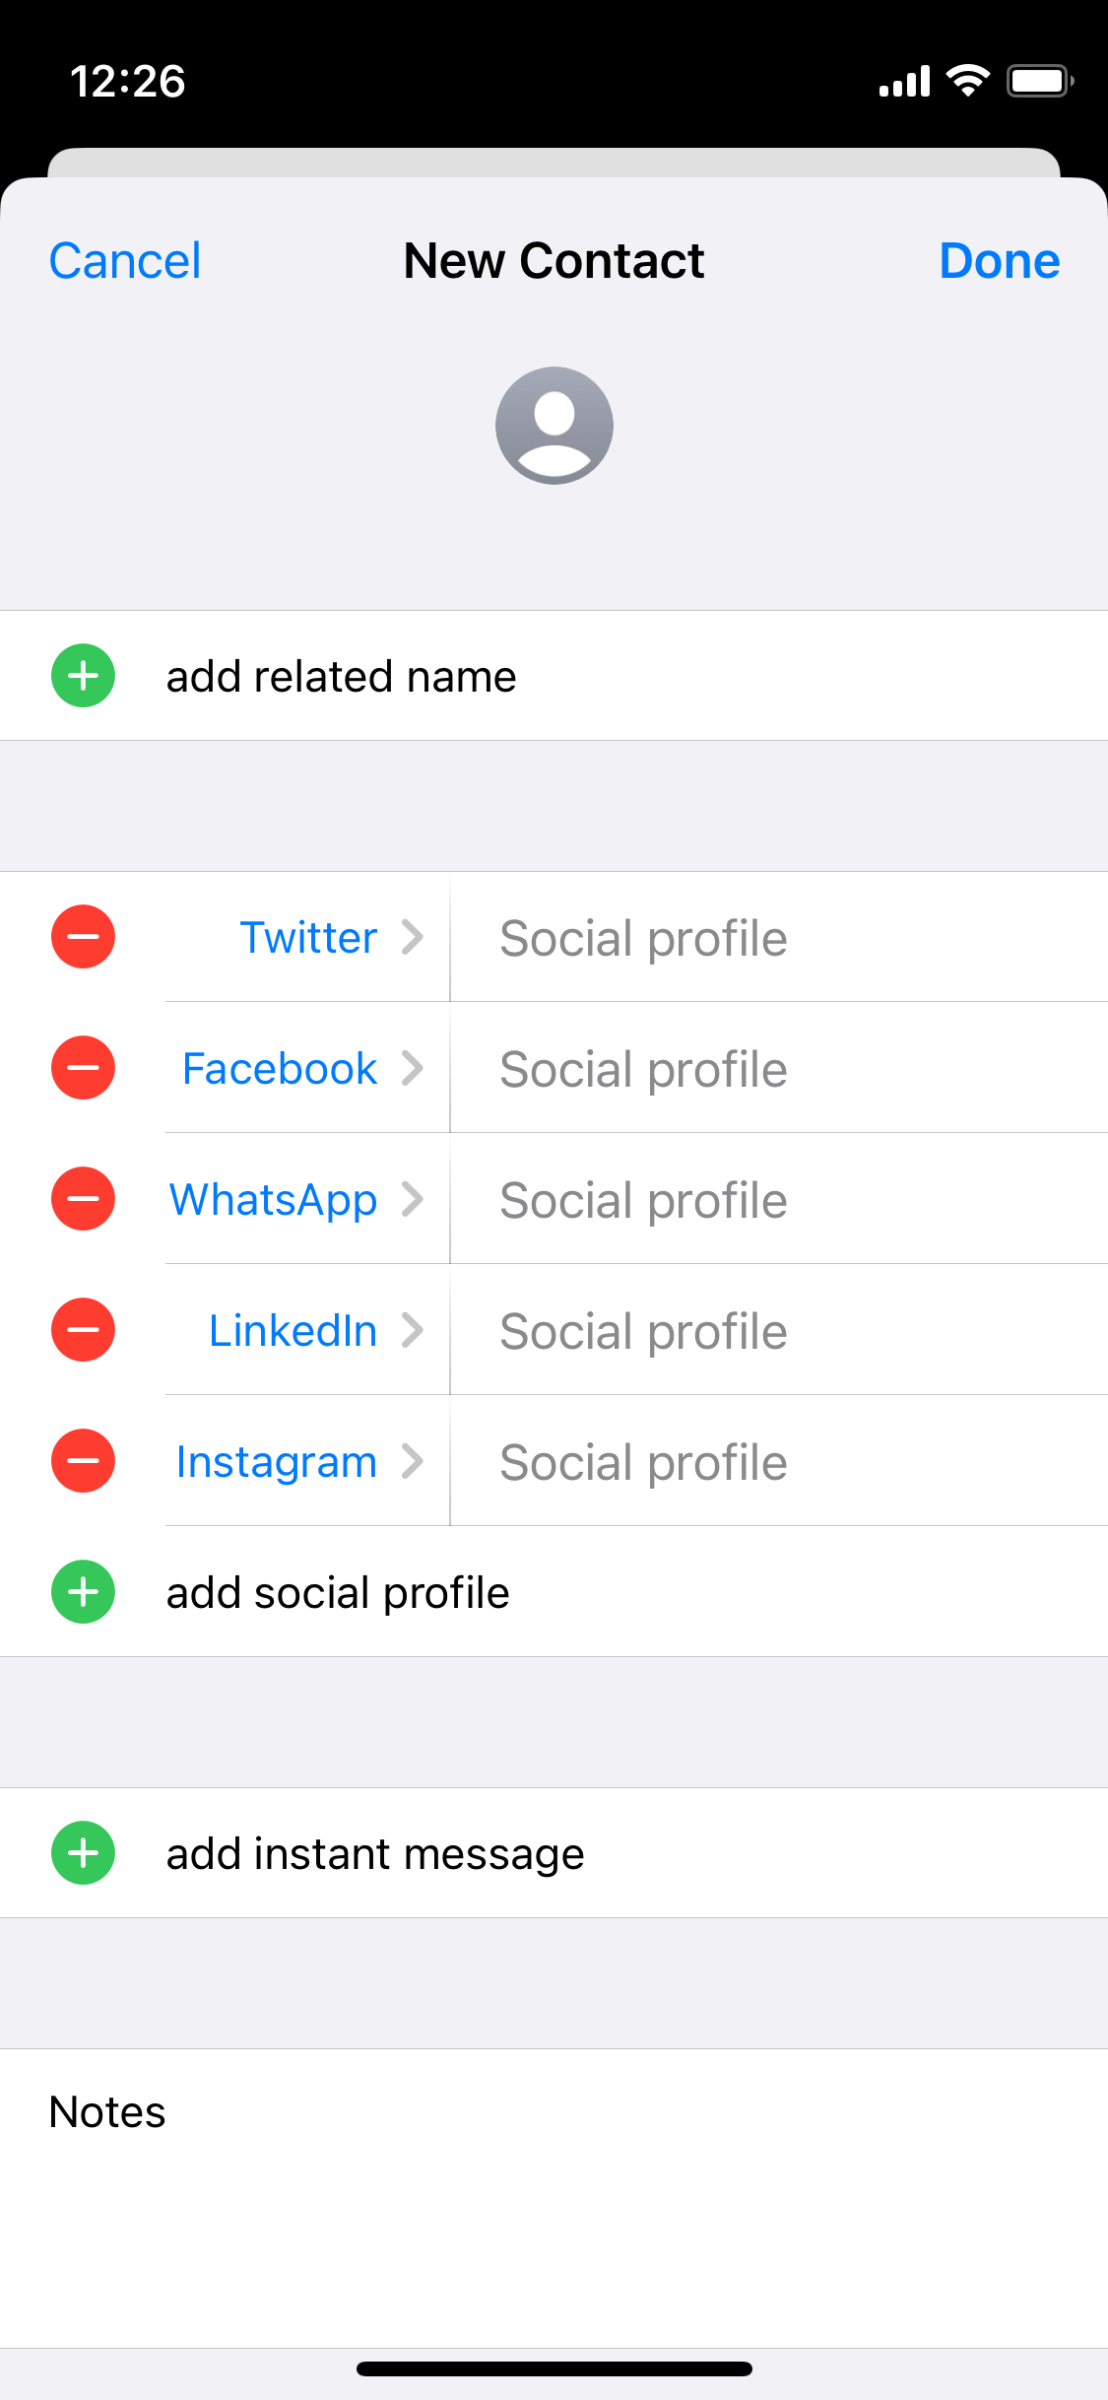 Apple’s iOS allows you to add social profiles to individual contacts in your address book